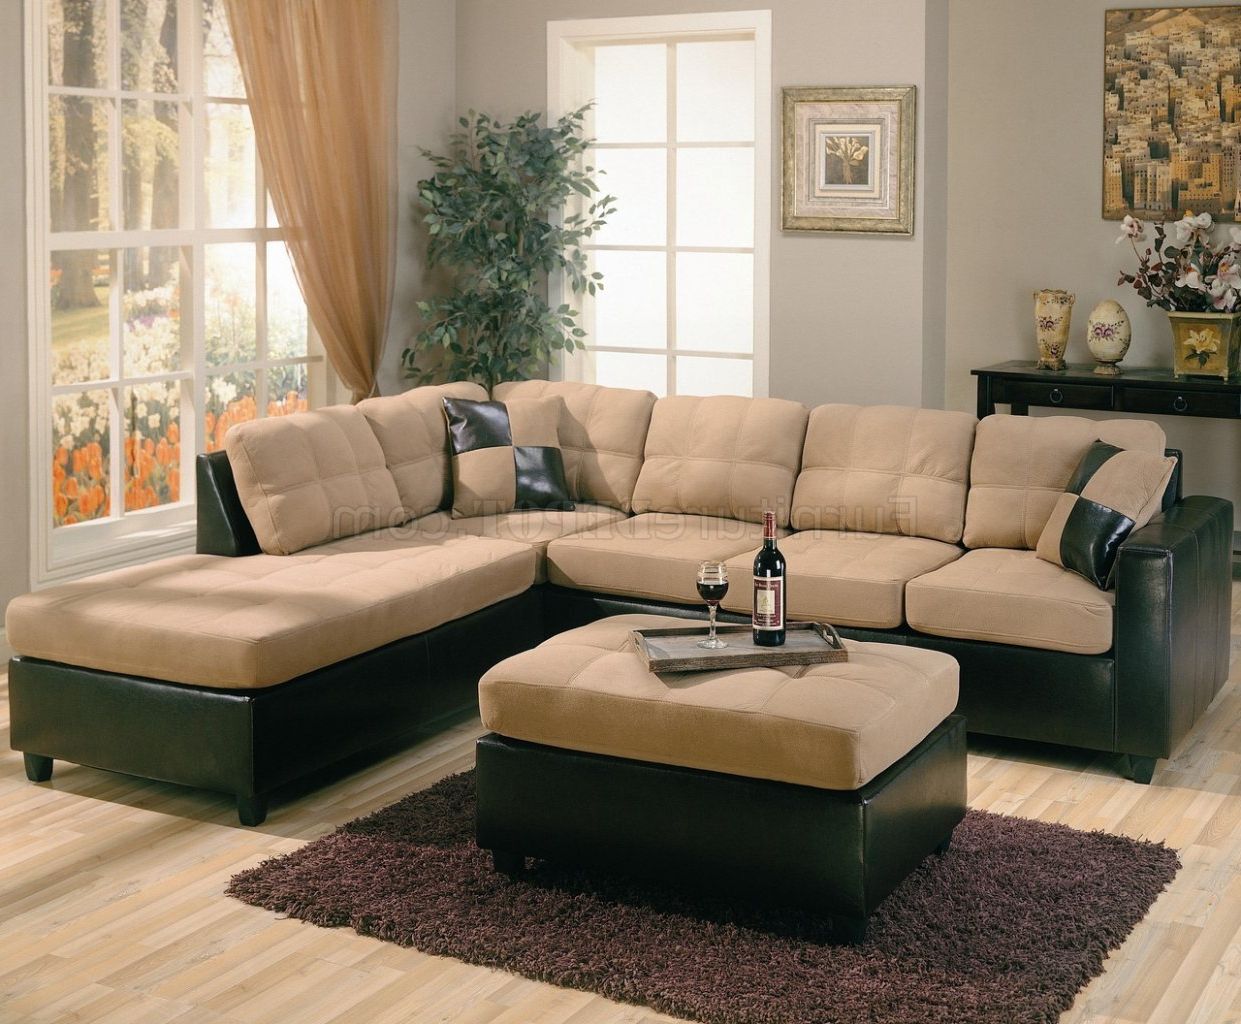 Two Tone Tan Microfiber & Dark Brown Faux Leather Sectional Sofa With Faux Leather Sofas In Dark Brown (View 9 of 20)